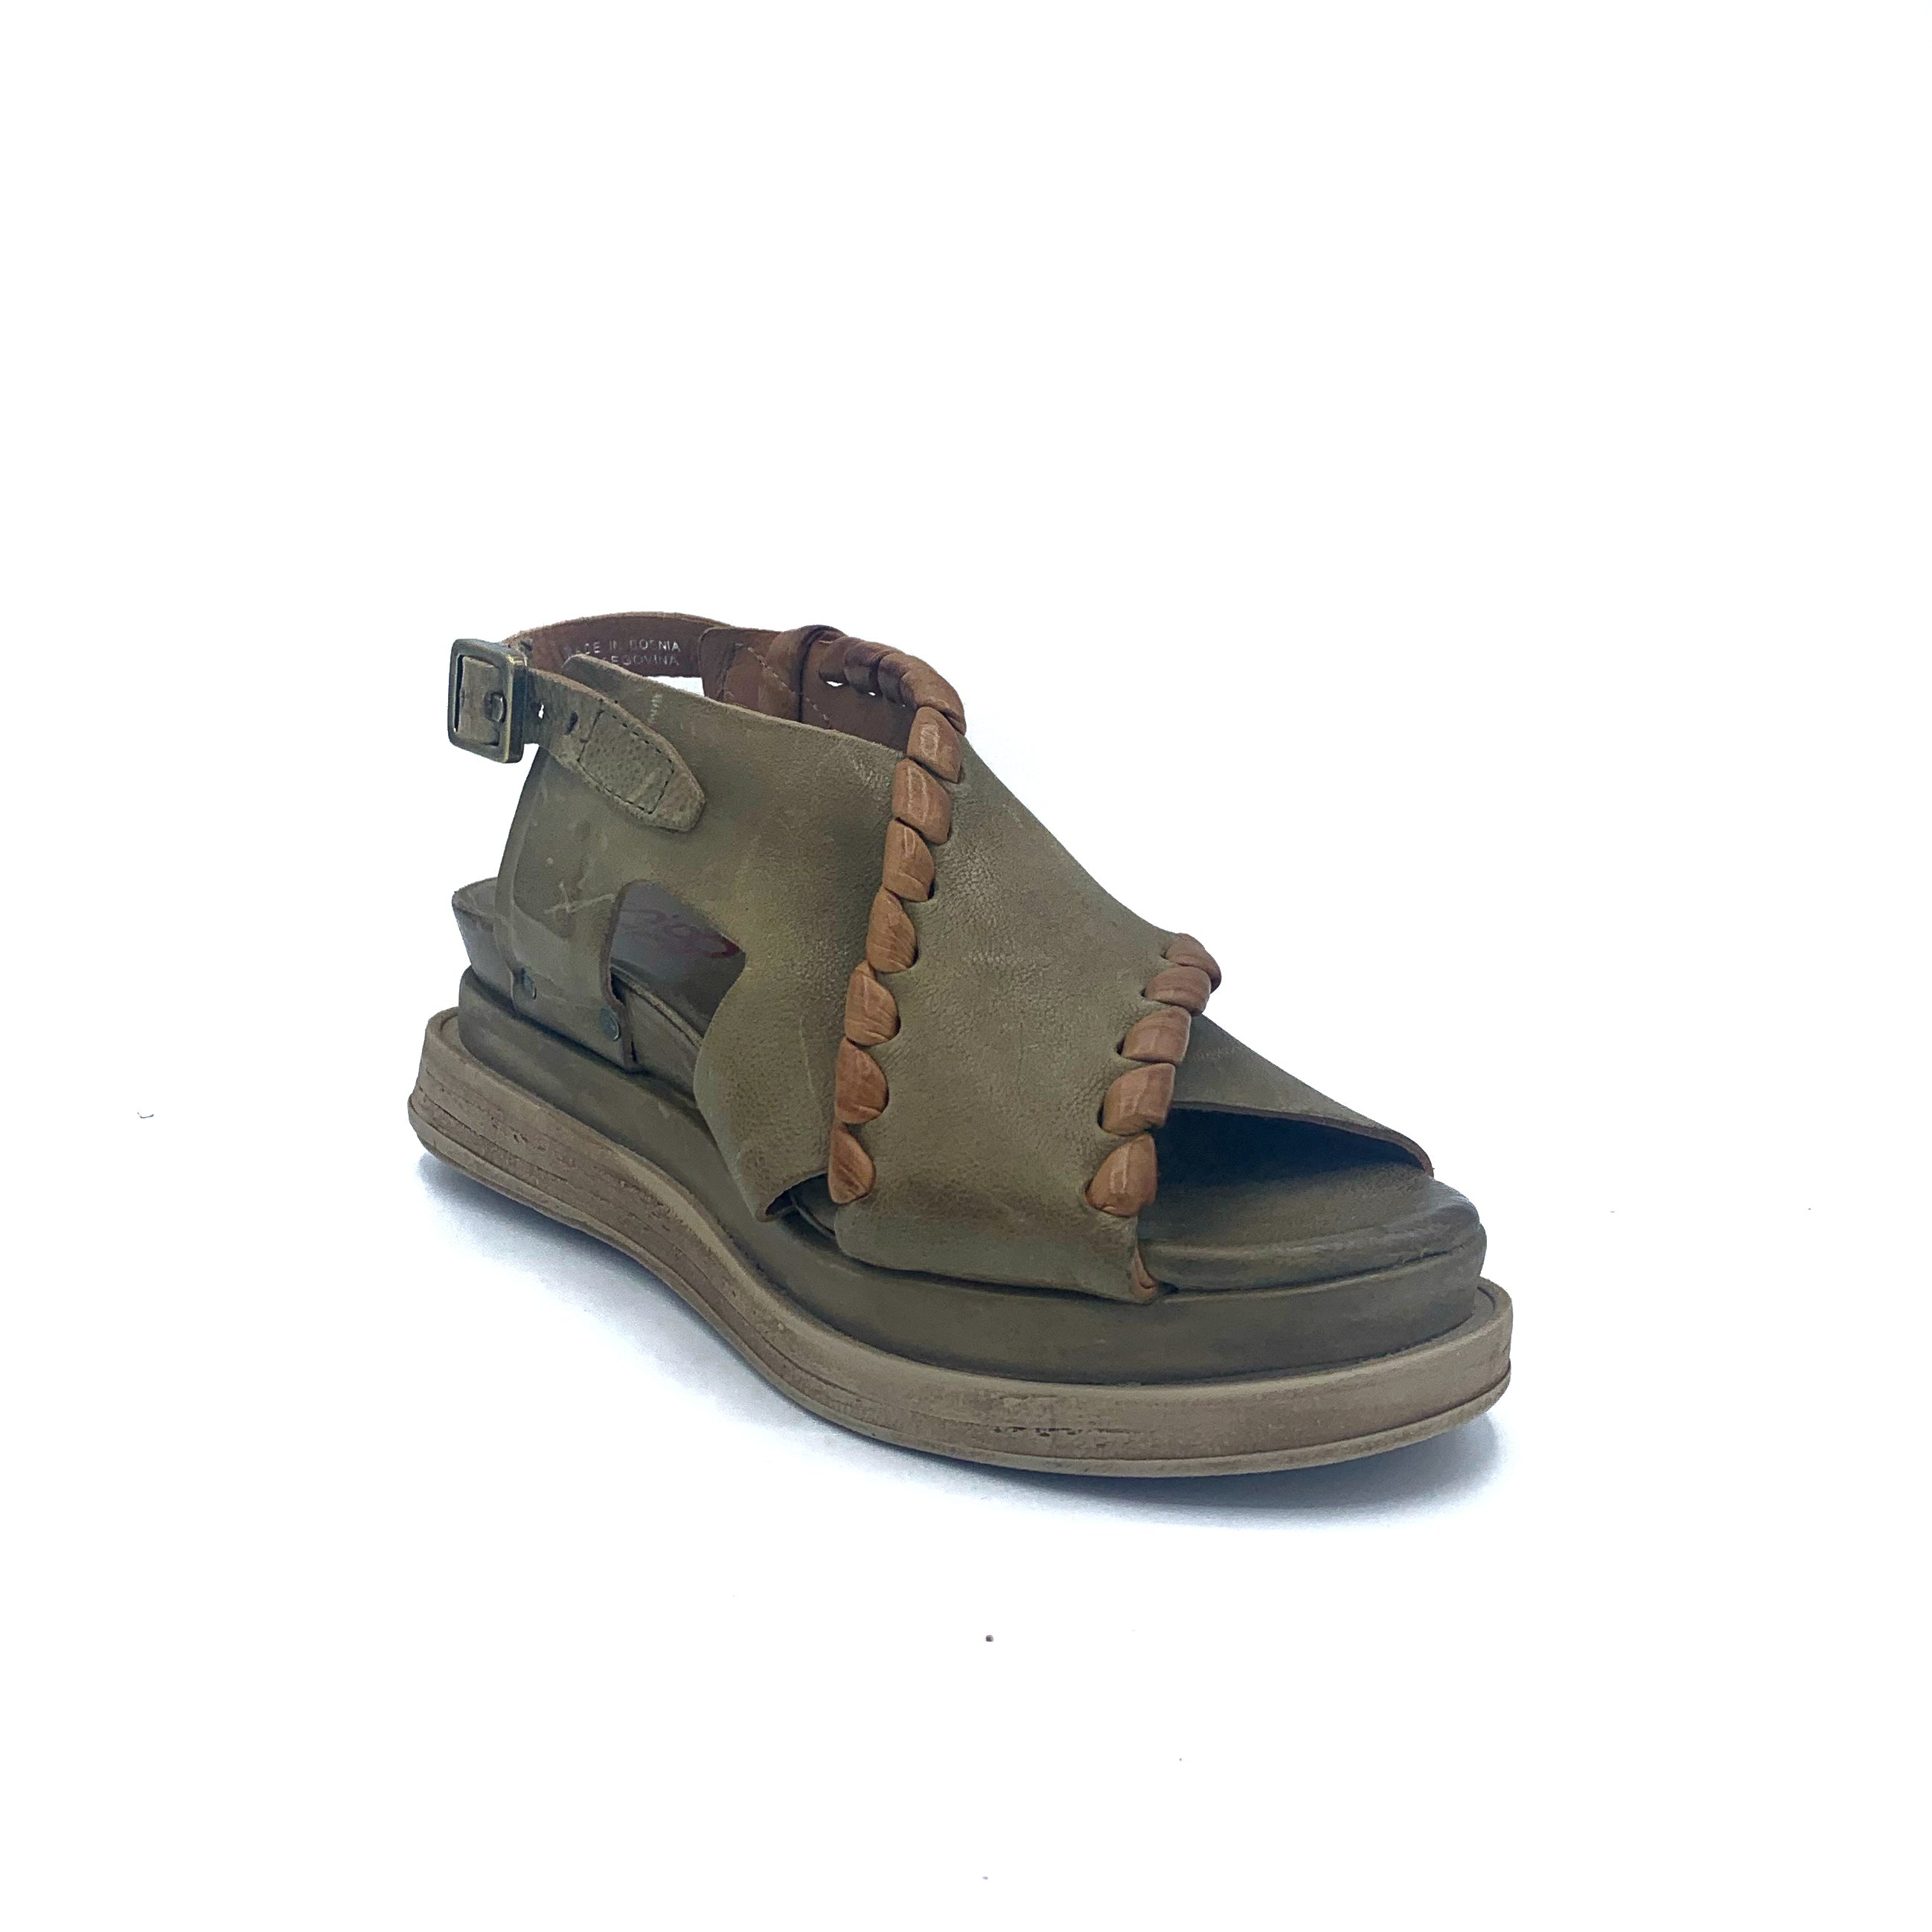 Outer front side view of the A.S.98 Lumi sandal in green